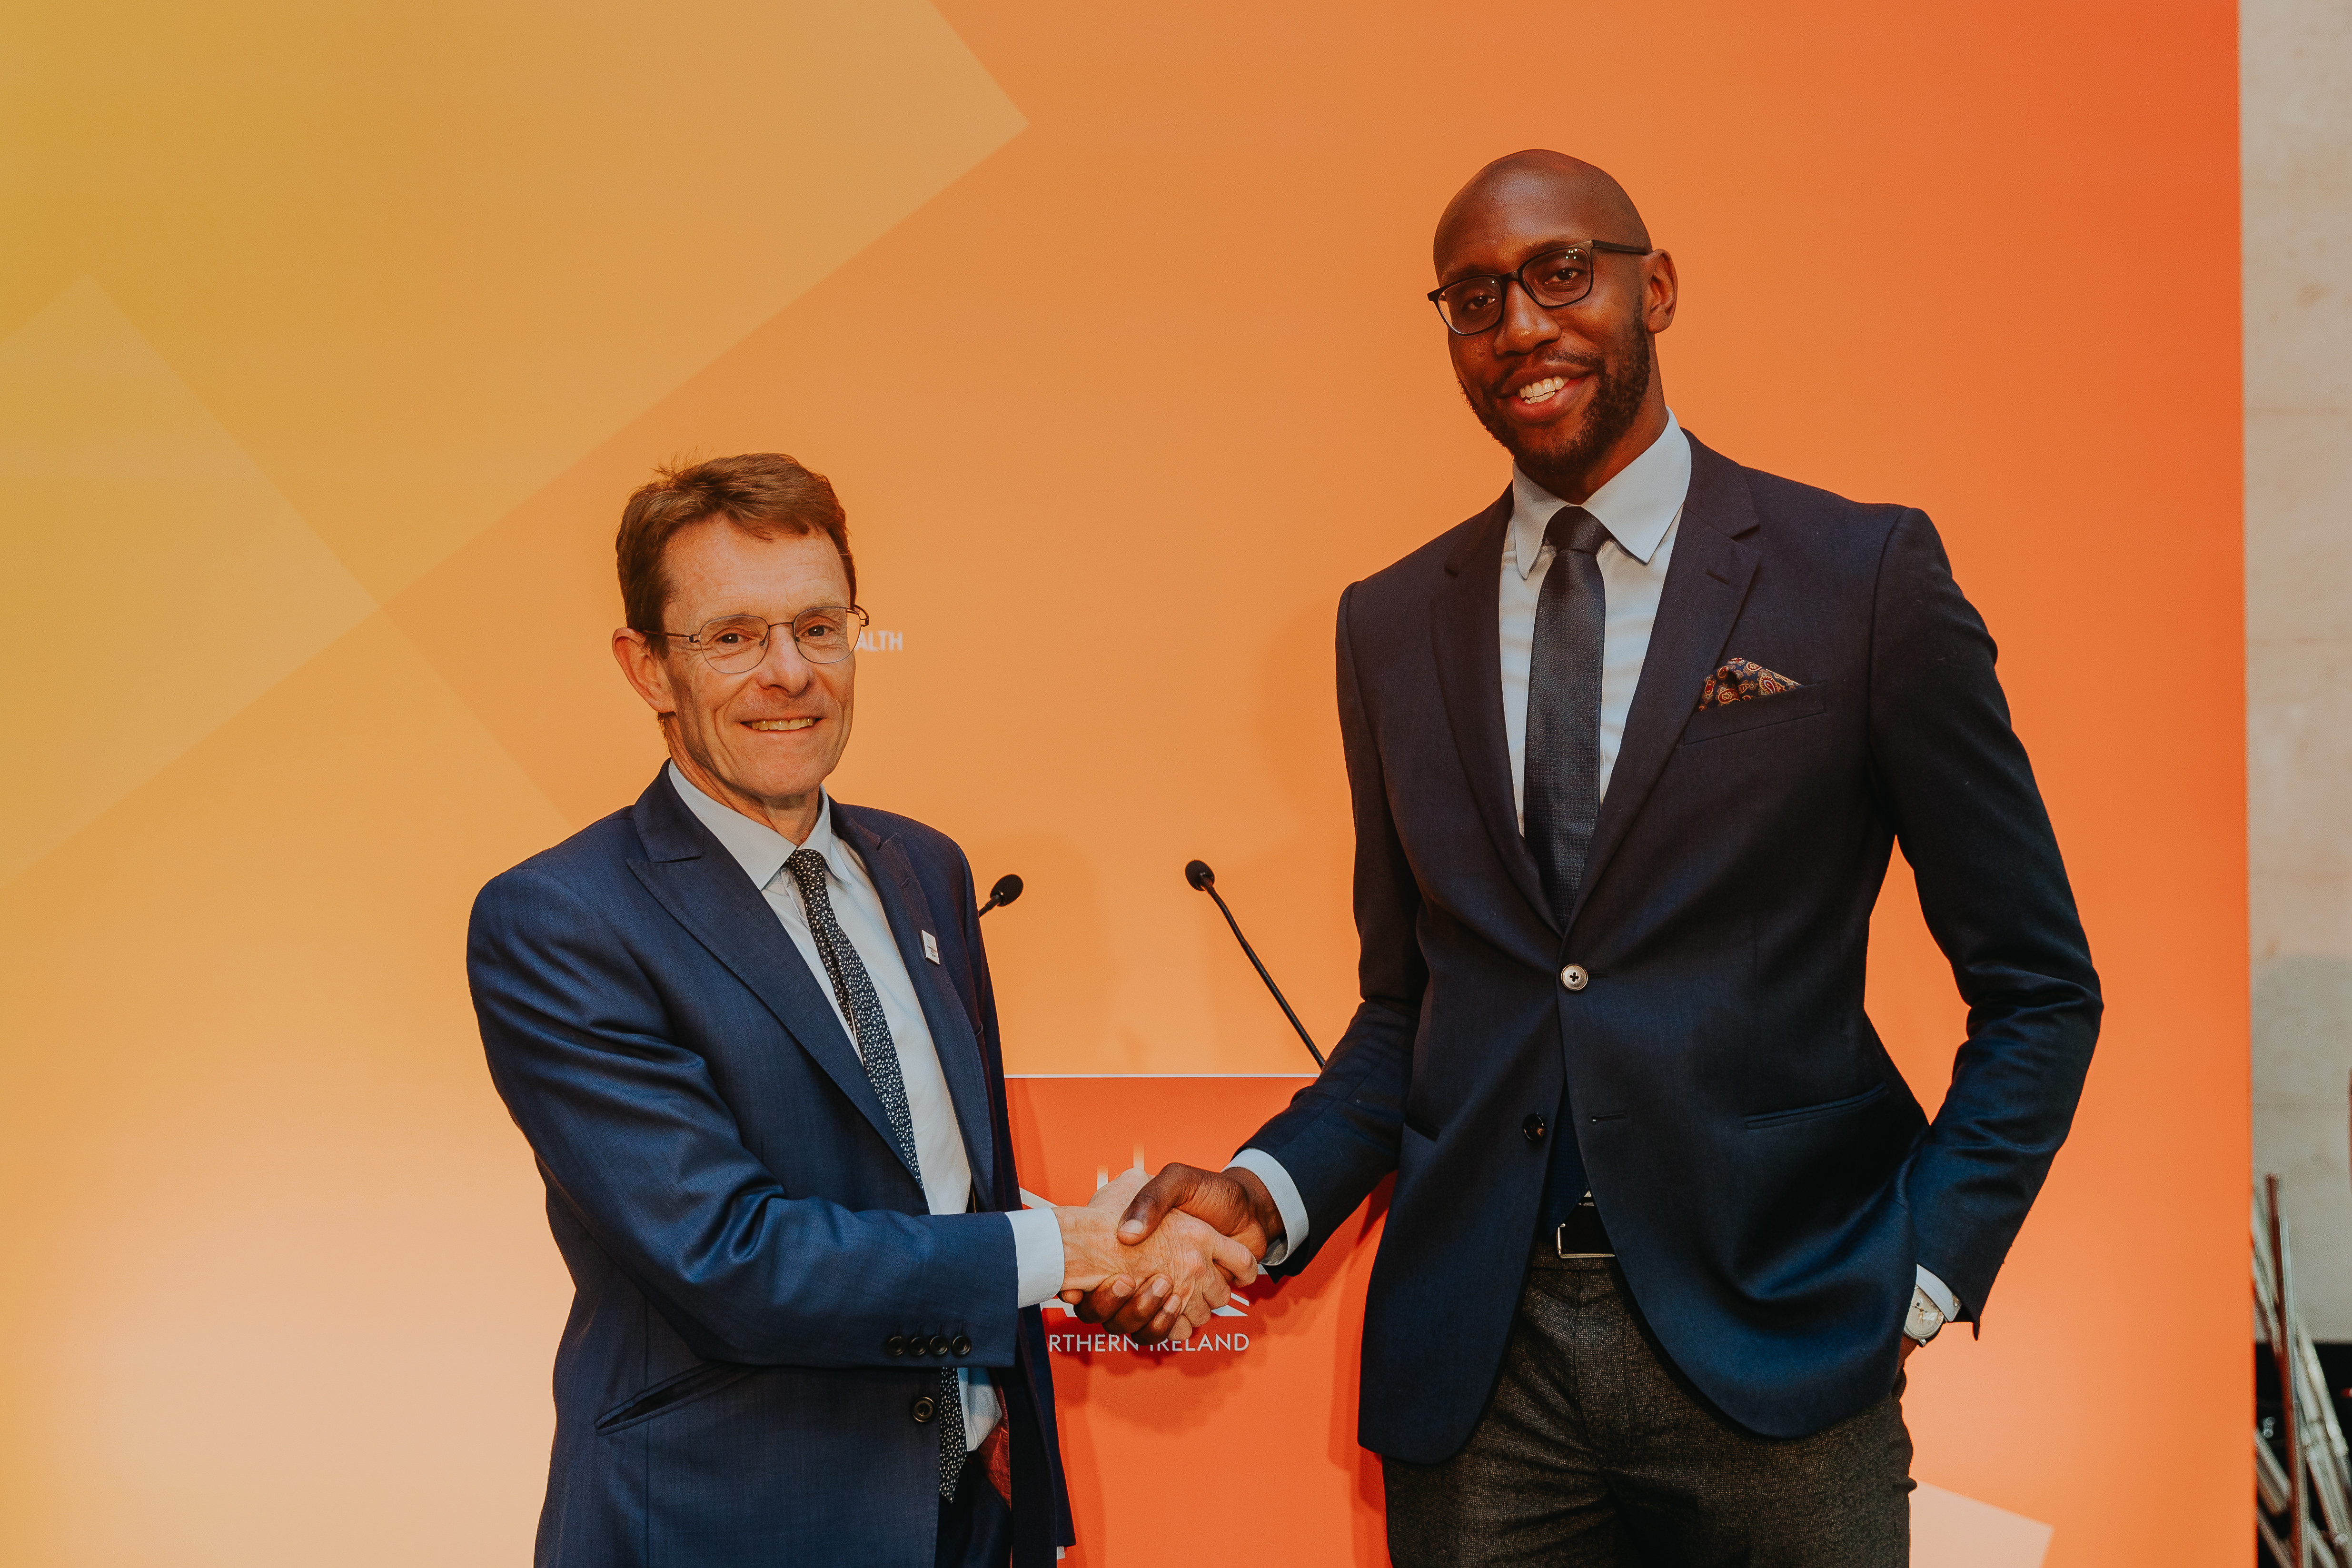 Andy Street, Mayor of the West Midlands (left) and Zephaniah Chukwudum, business manager to the CEO at Microsoft UK and United by 2022, Board Trustee, announce the digital skills joint initiative